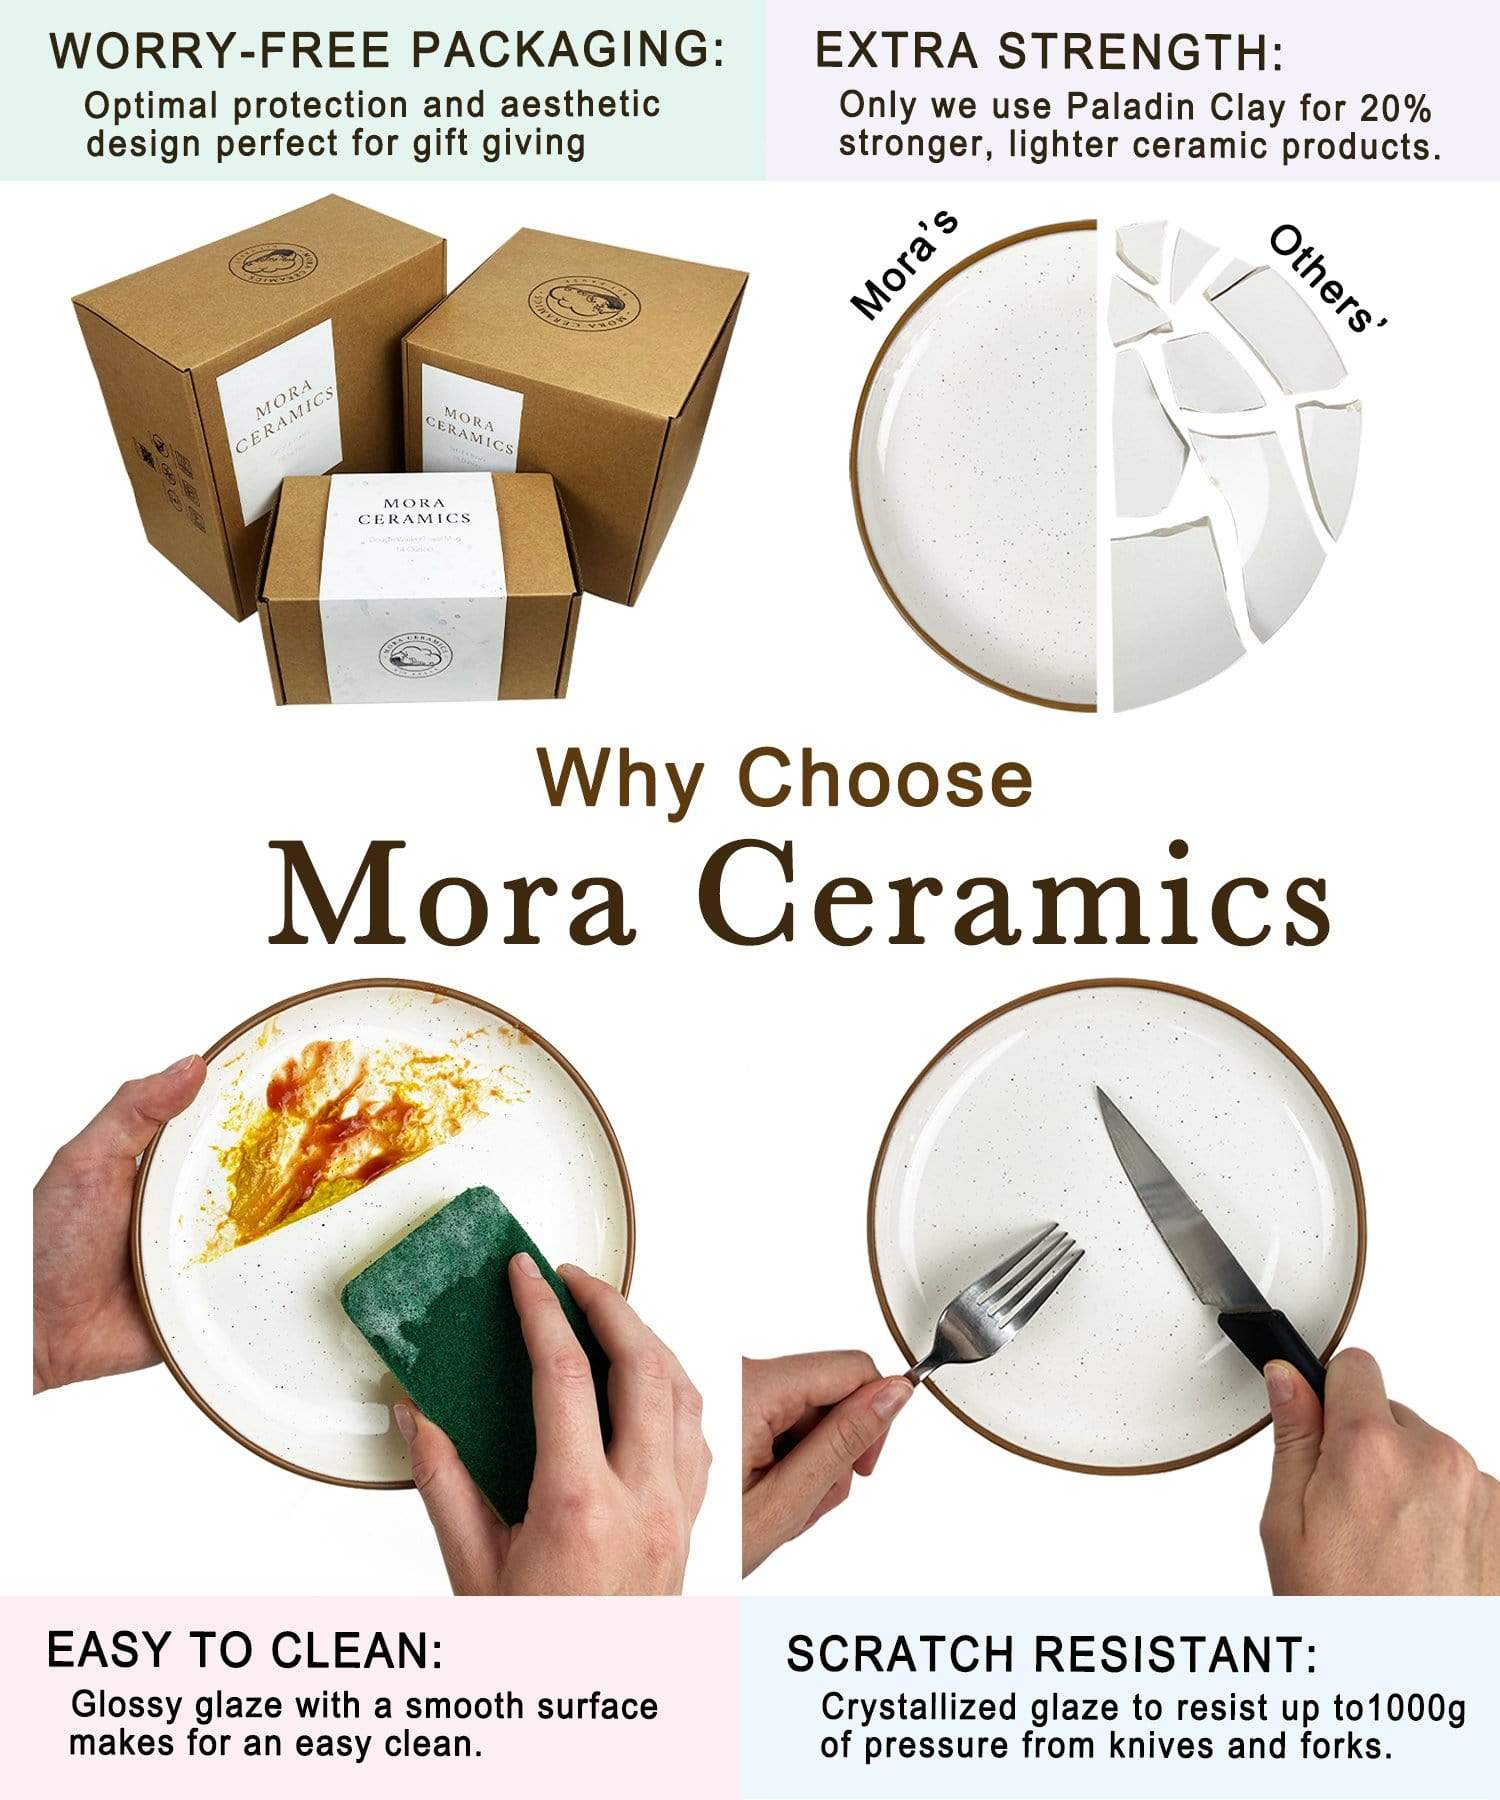 Mora Ceramics, worry free packaging, extra strength, easy to clean and scratch resistant